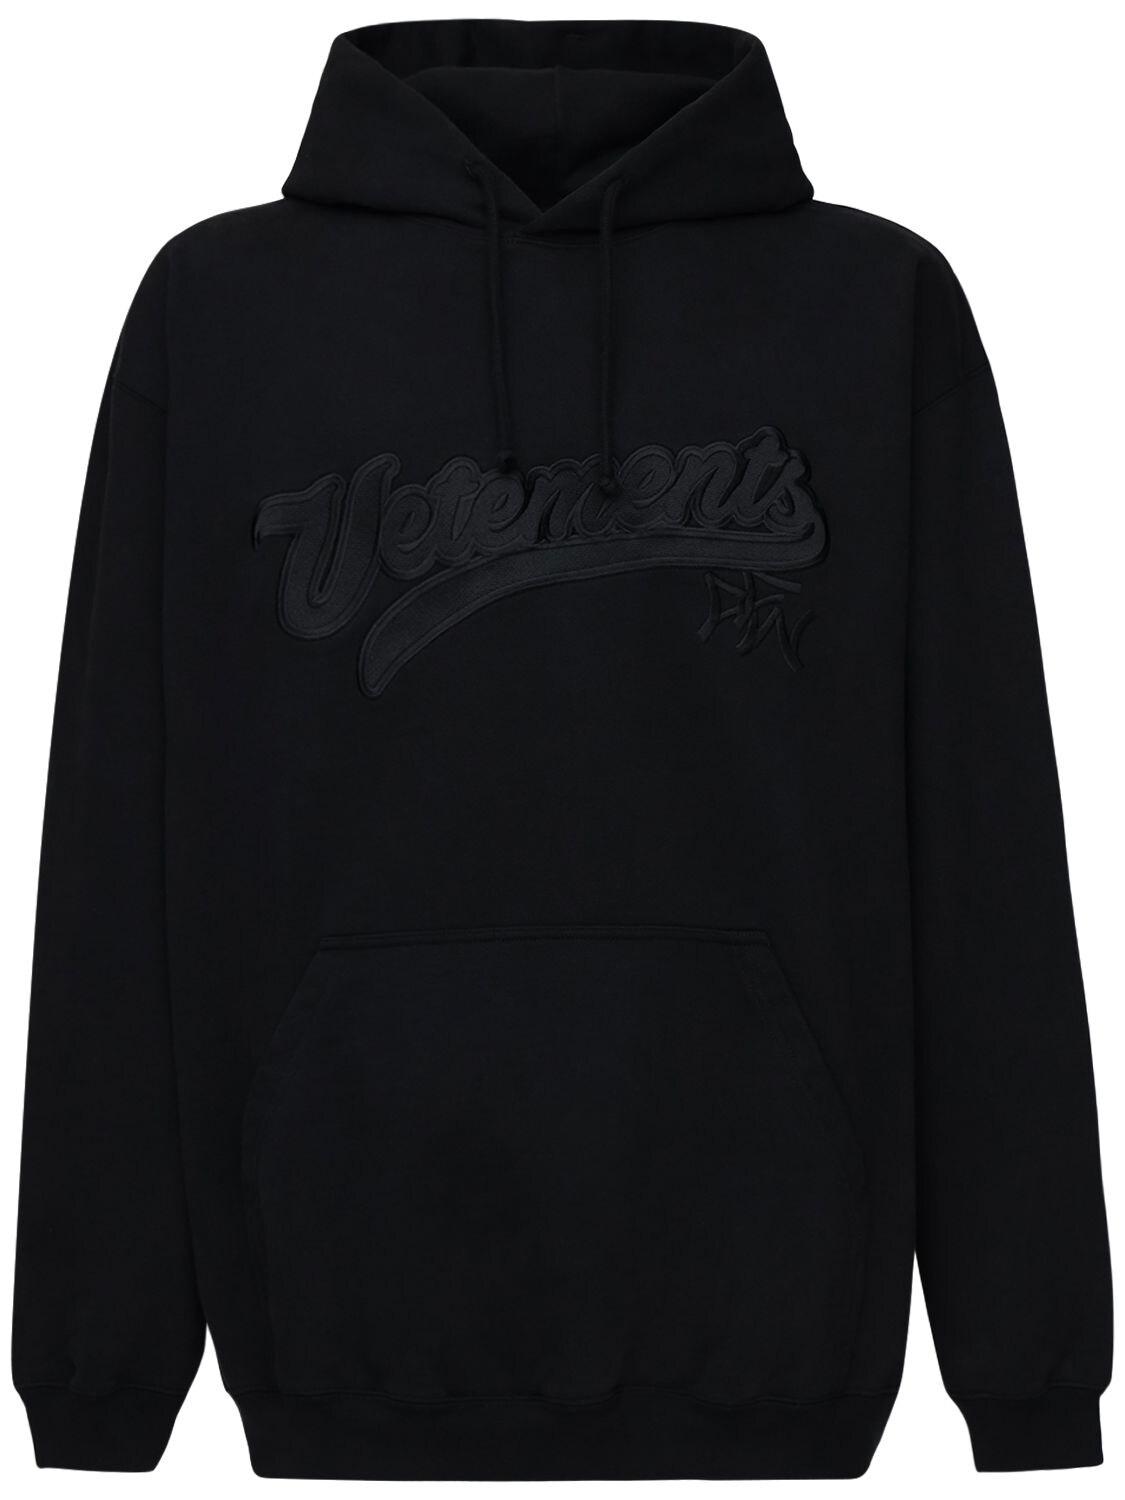 Vetements Hip Hop Embroidery Cotton Blend Hoodie in Black for Men - Lyst